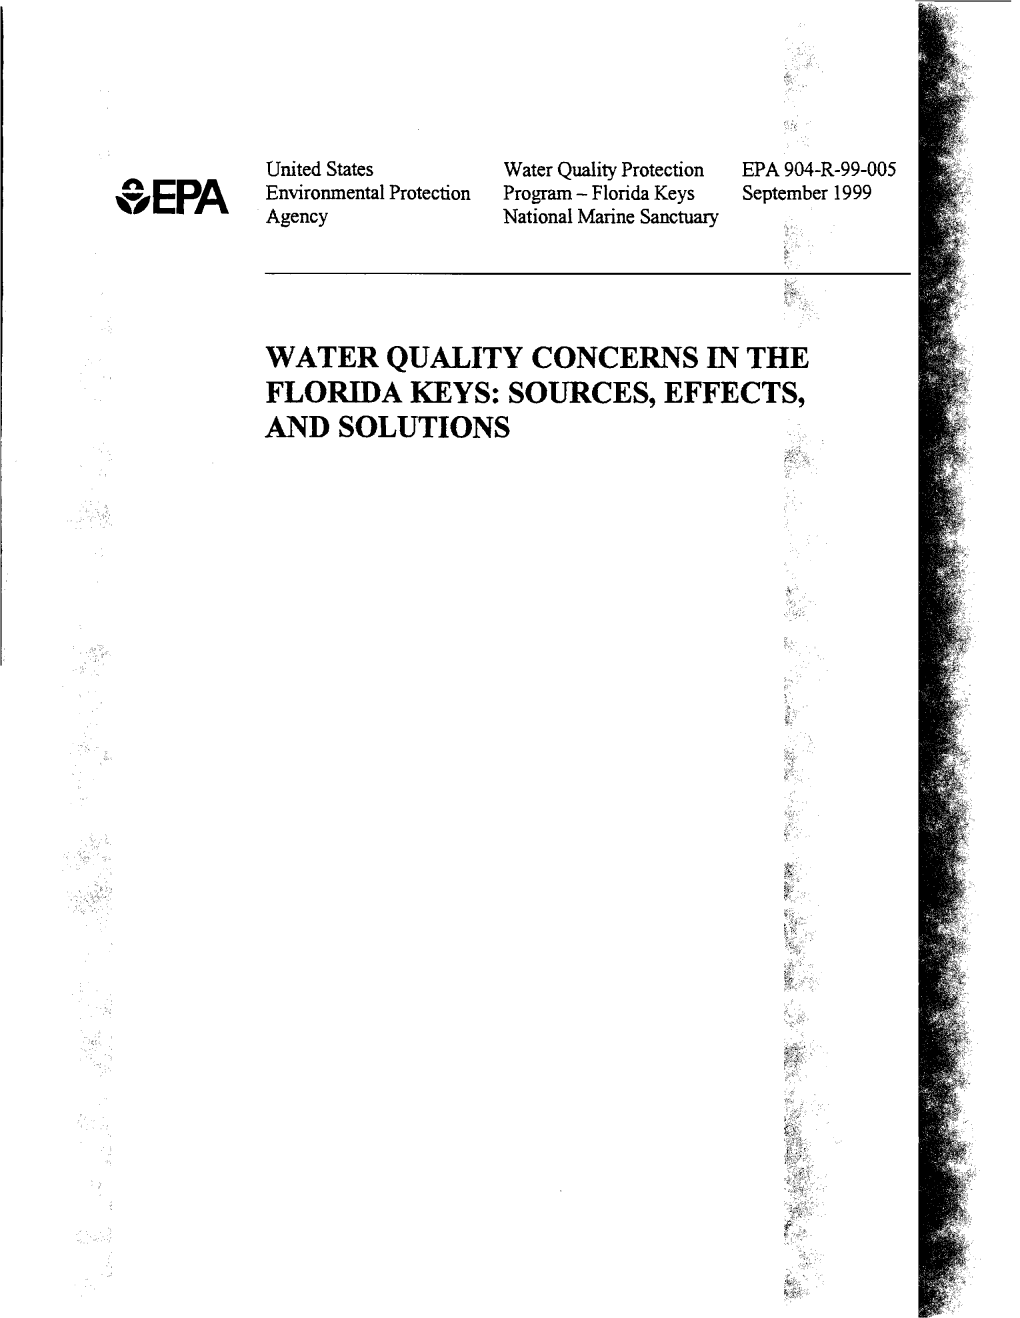 Water Quality Concerns in the Florzda Keys: Sources, Effects, and Solutions